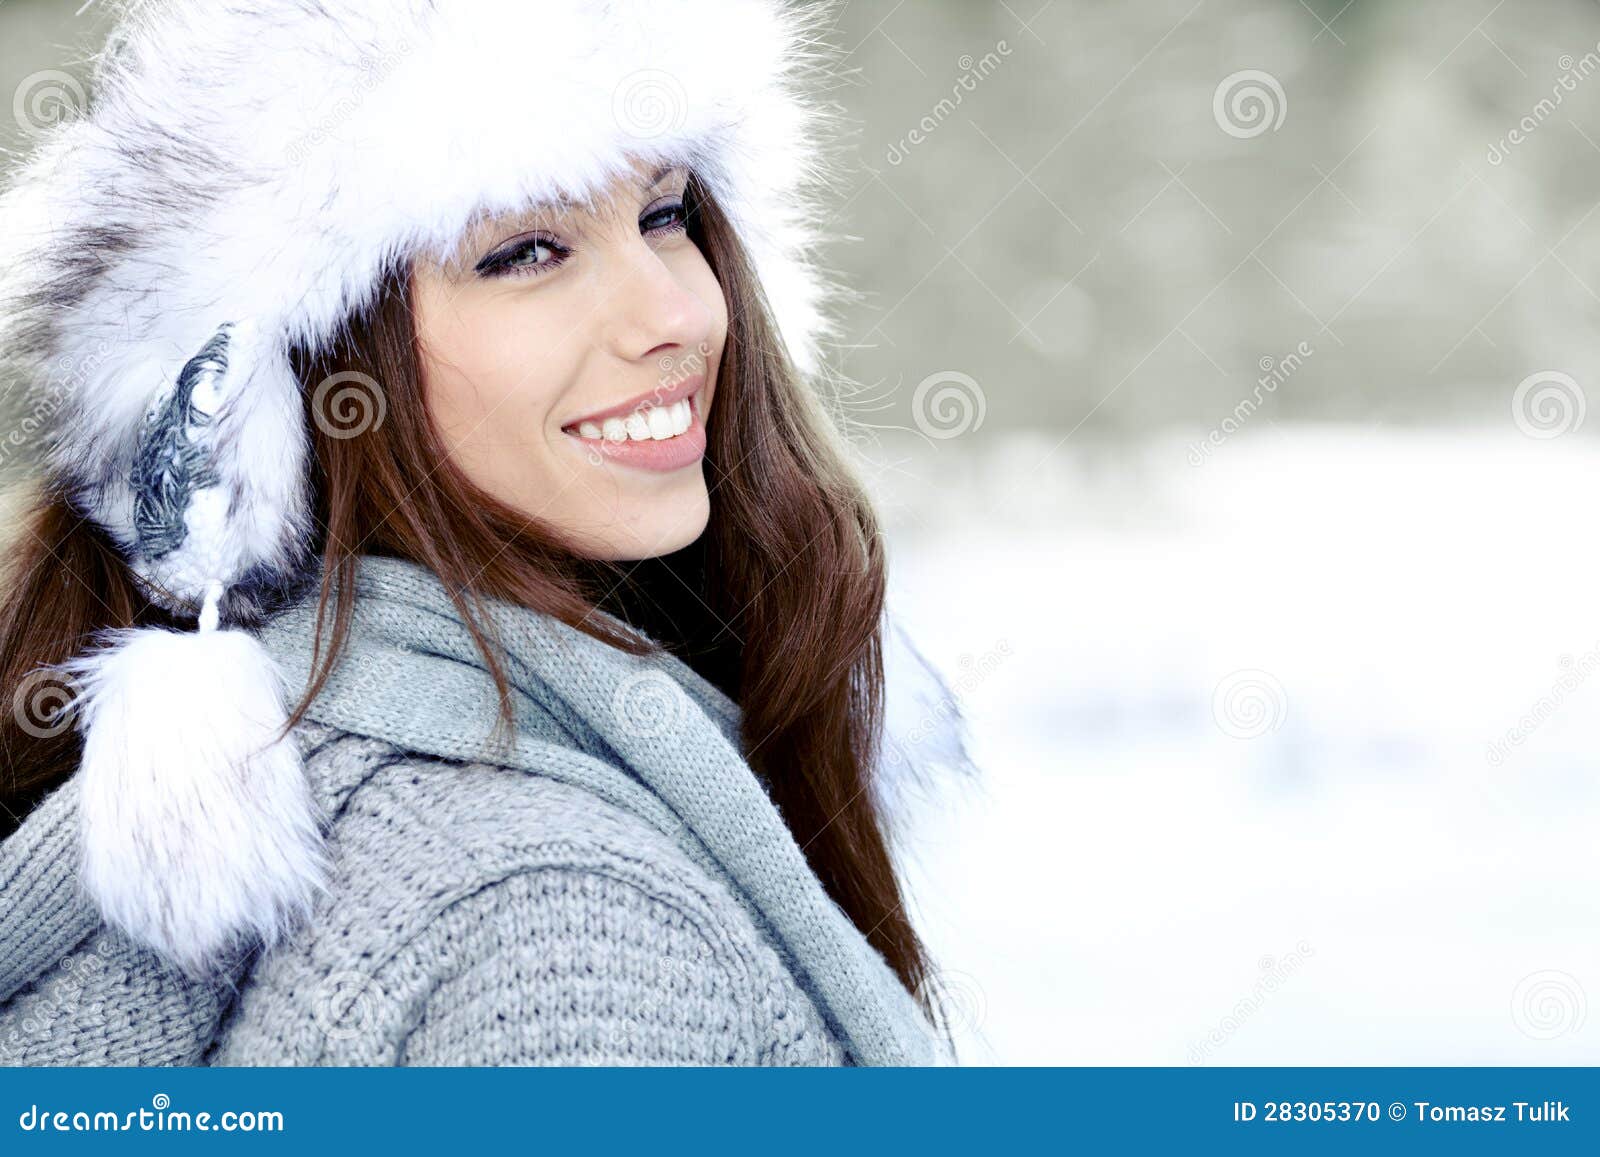 Brunette Girl I Winter Clothes Stock Photo - Image of pretty, outdoor ...